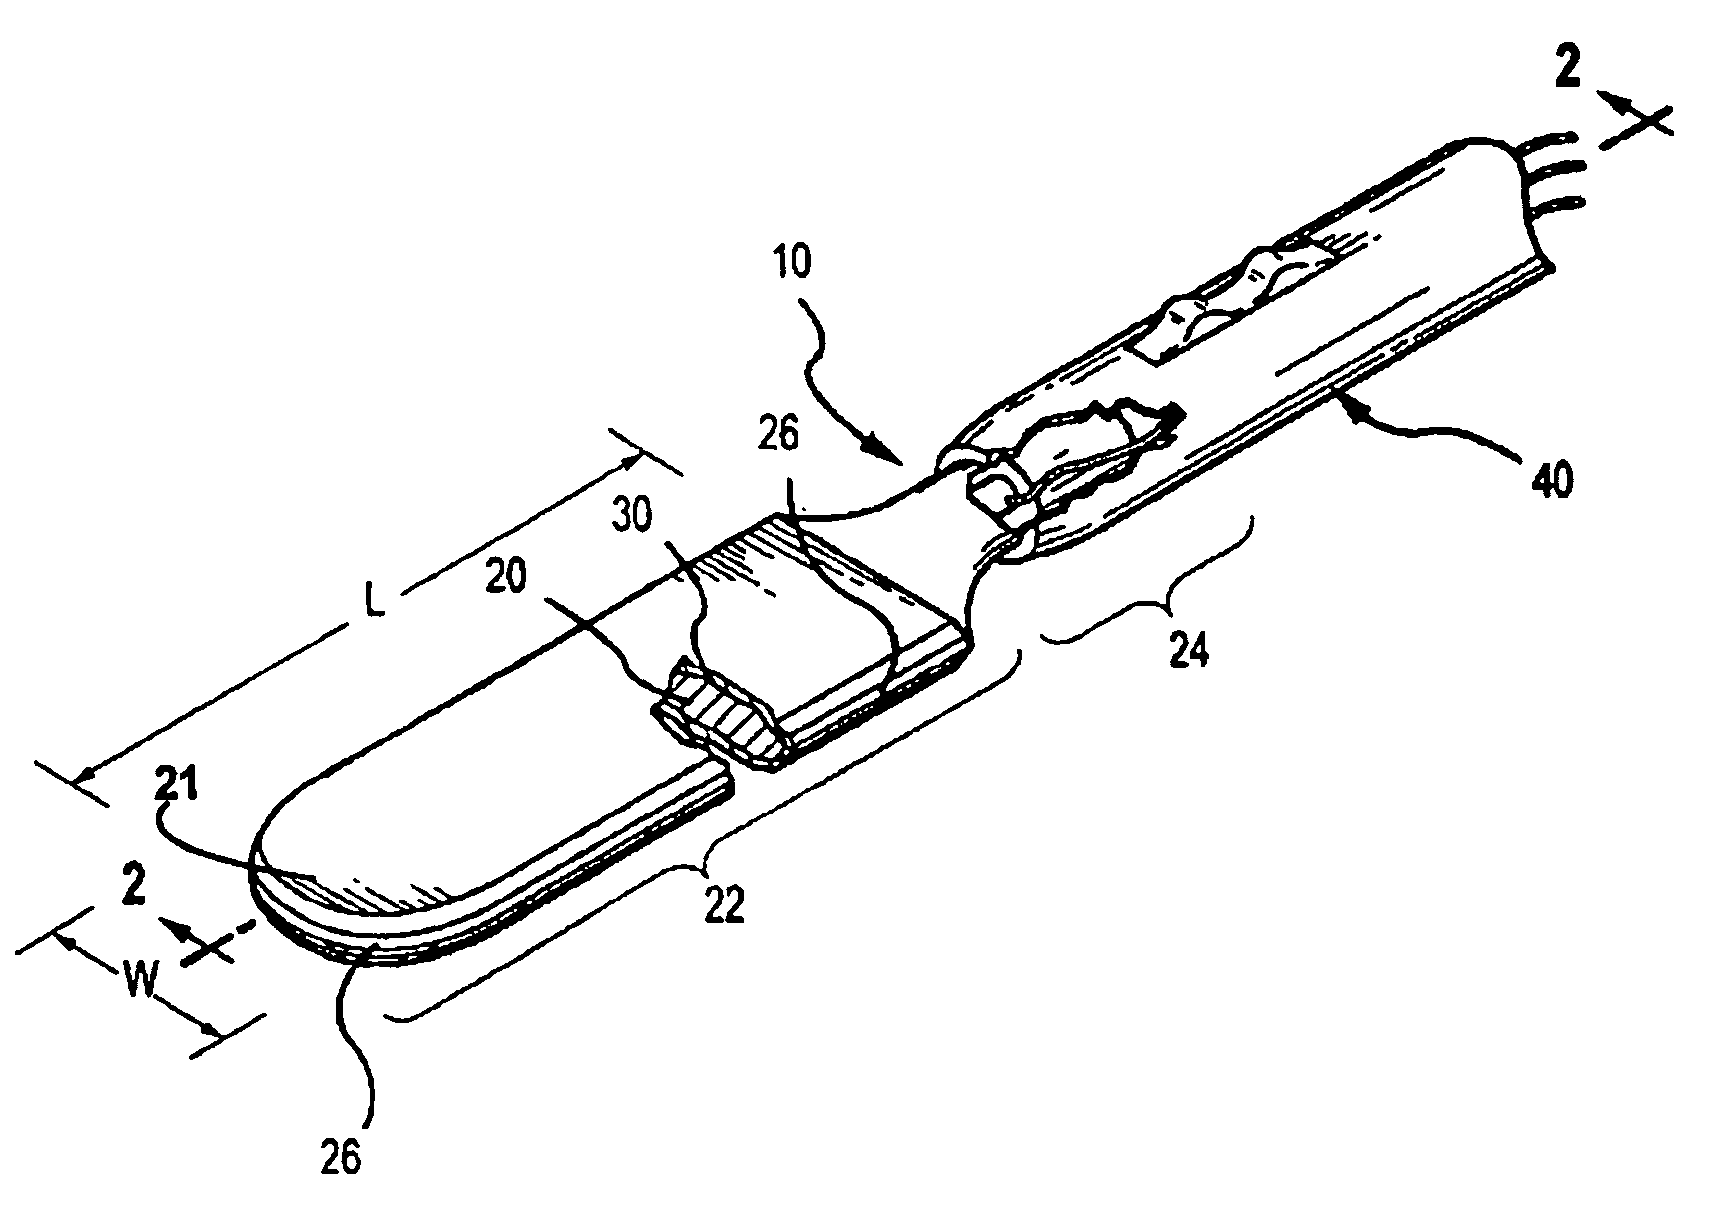 Electrosurgical instrument